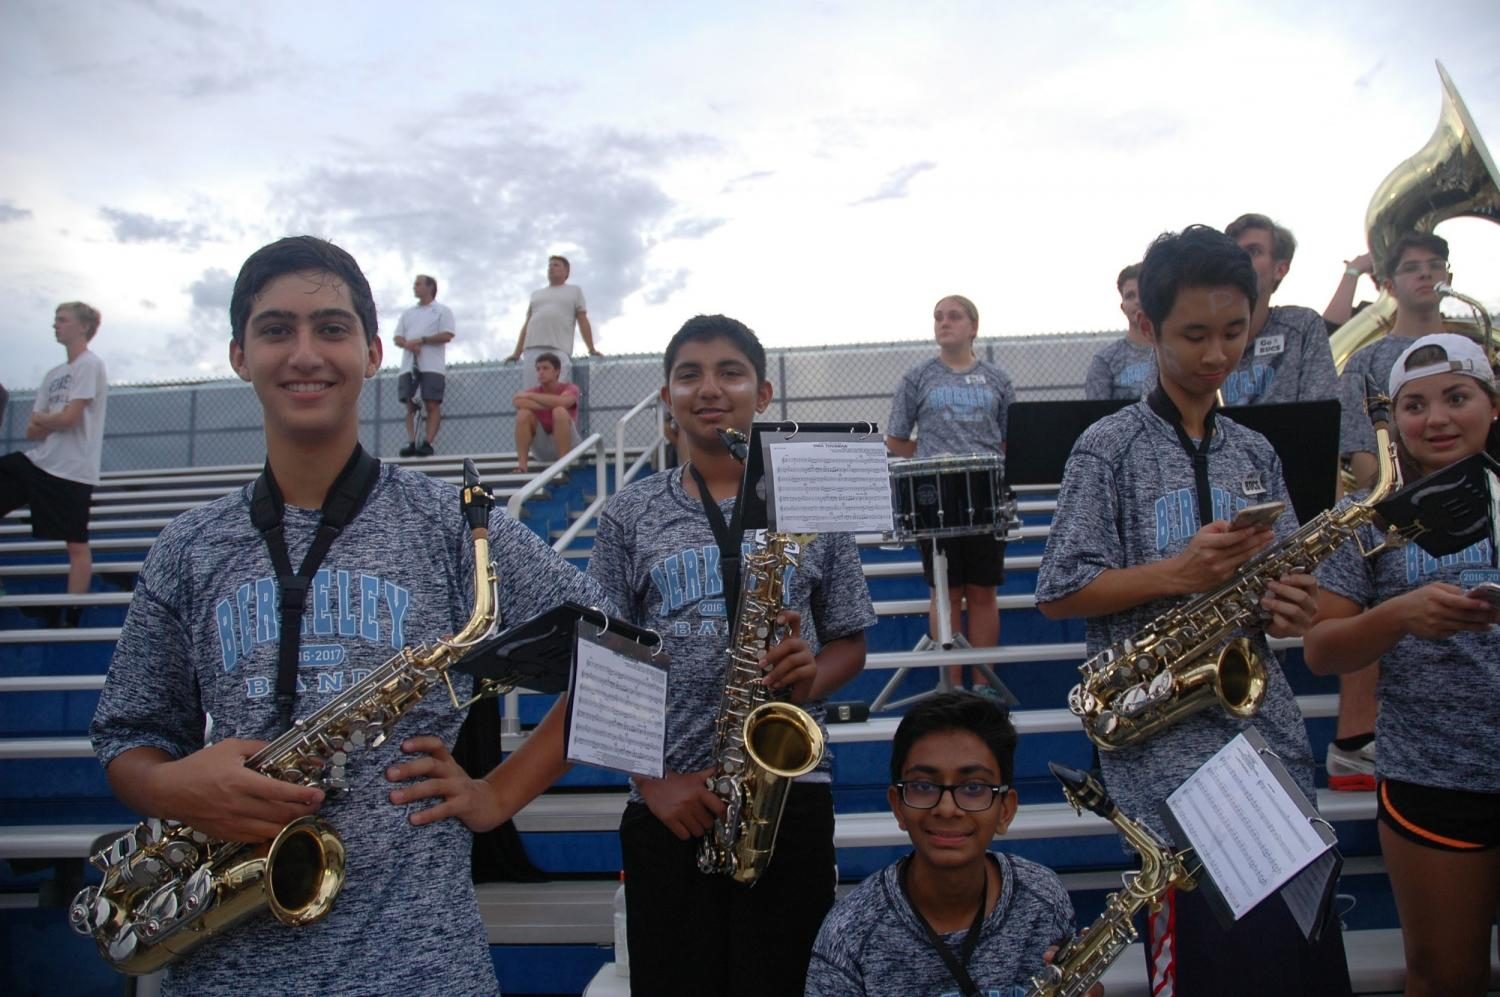 BANDING TOGETHER: Berkeley Band members Samir Saeed ’21, Ryan D’Cunha ’21 and Kevin Patel ’21 were proud to play during their first Tailgate as high school students.